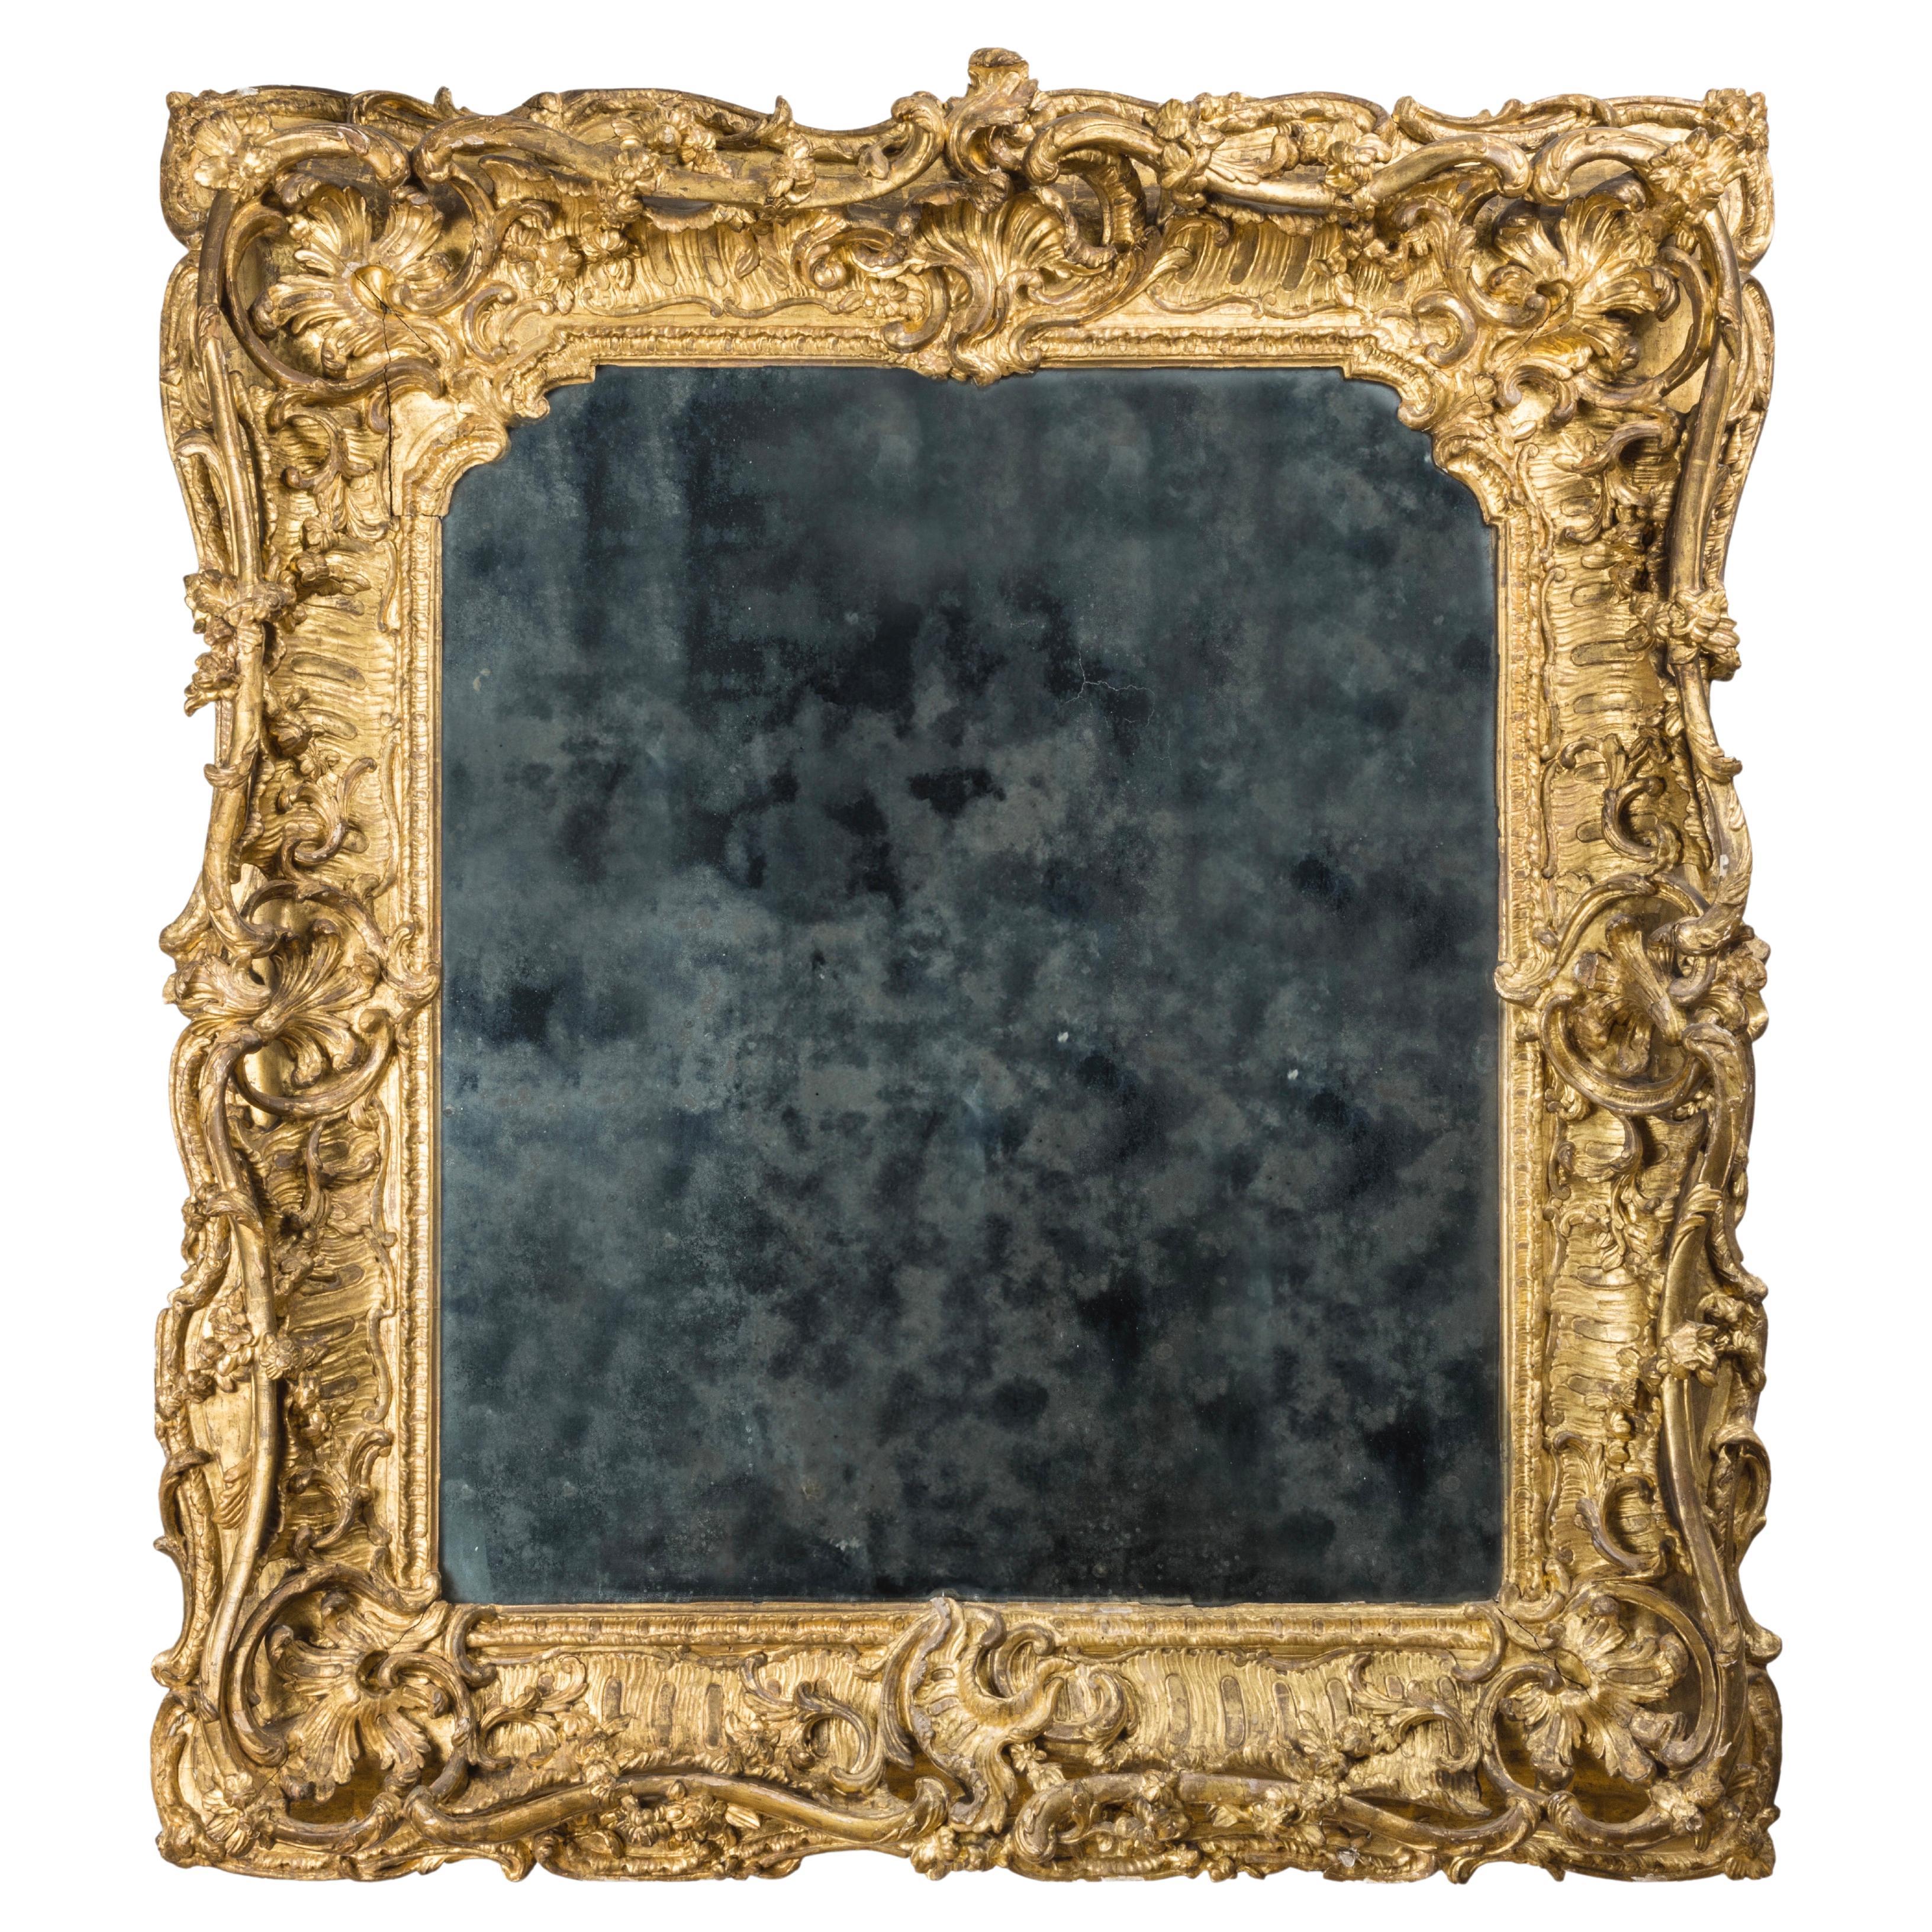 French Asymmetric 18th c. Rococo Frame, carved and gilded wood, circa 1735-40 For Sale